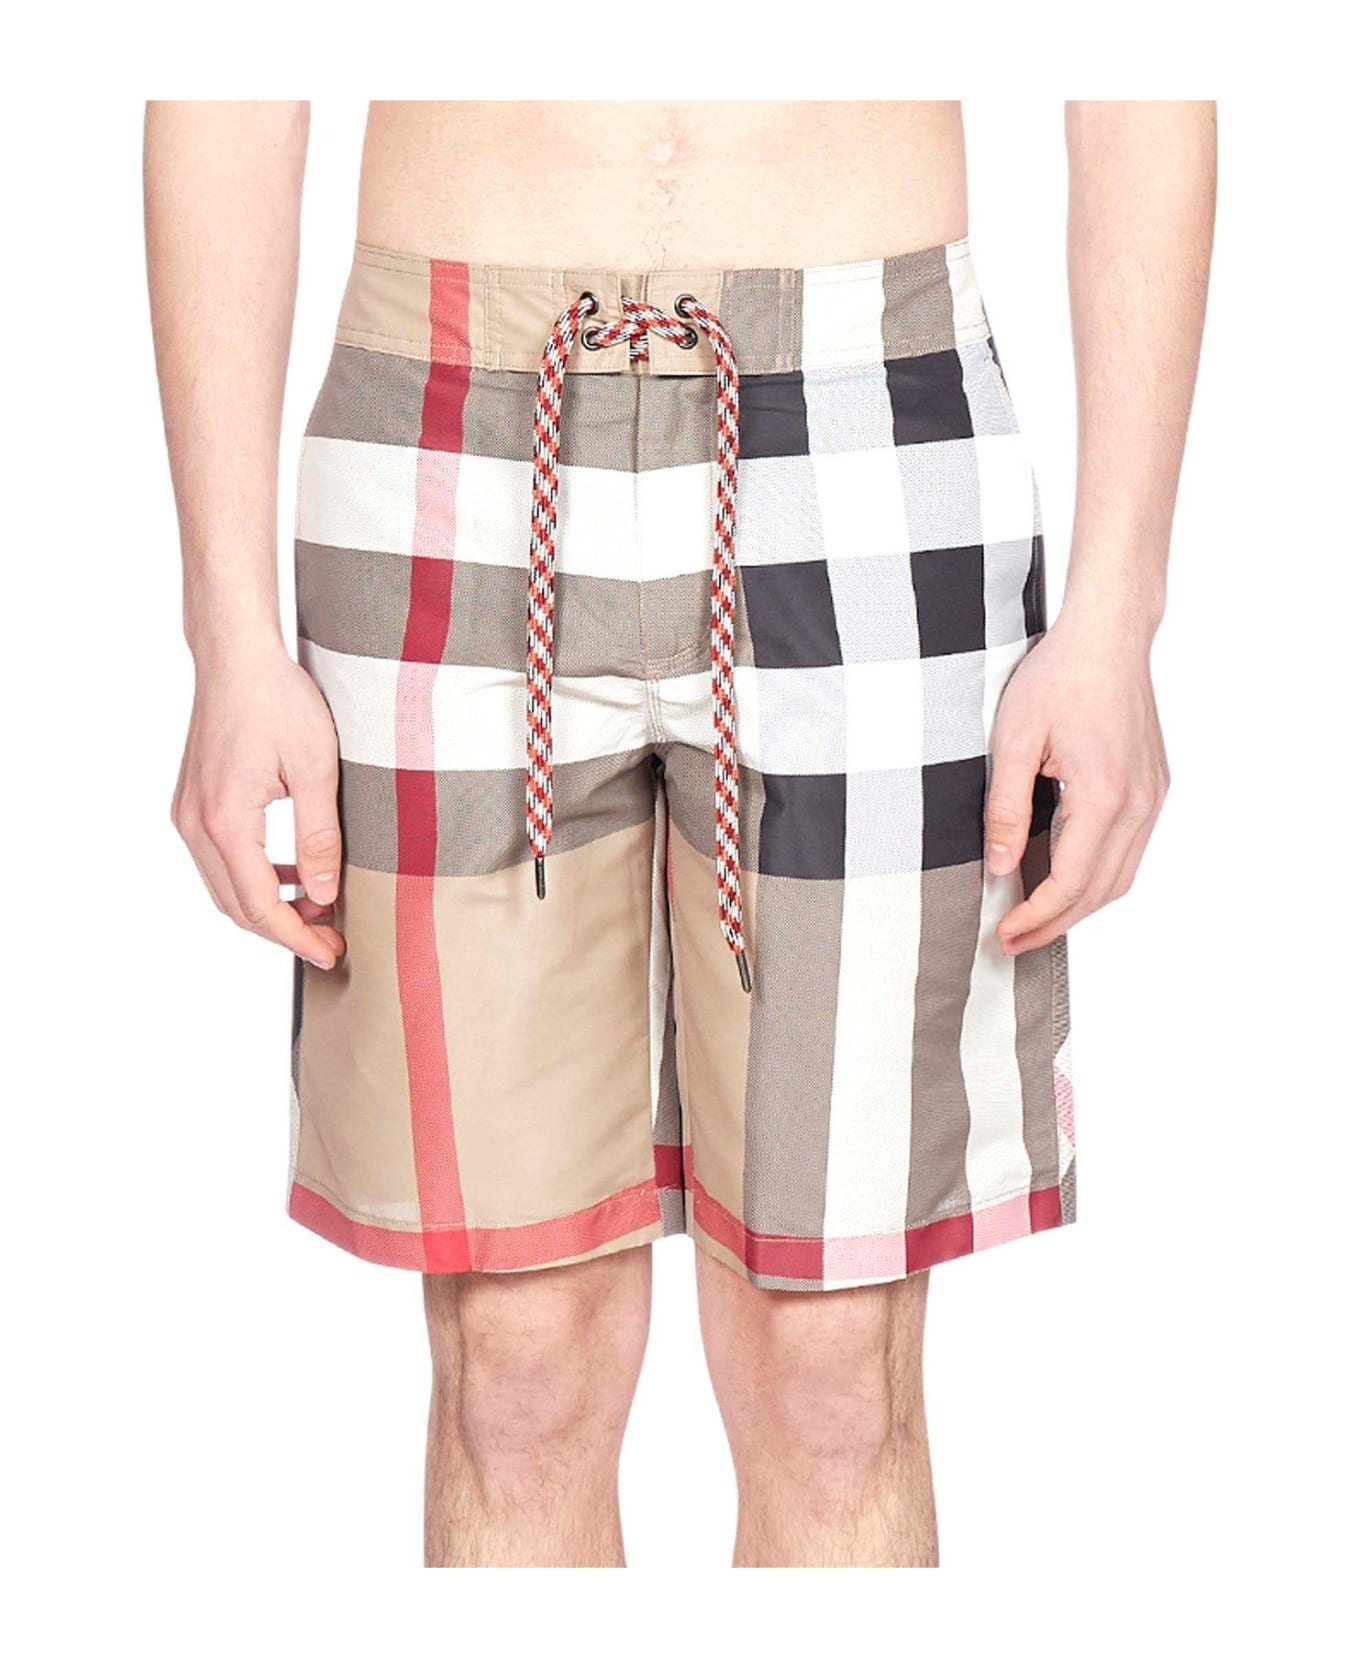 Burberry Checked Swim Shorts - Black graphic print T-shirt from featuring a graphic print